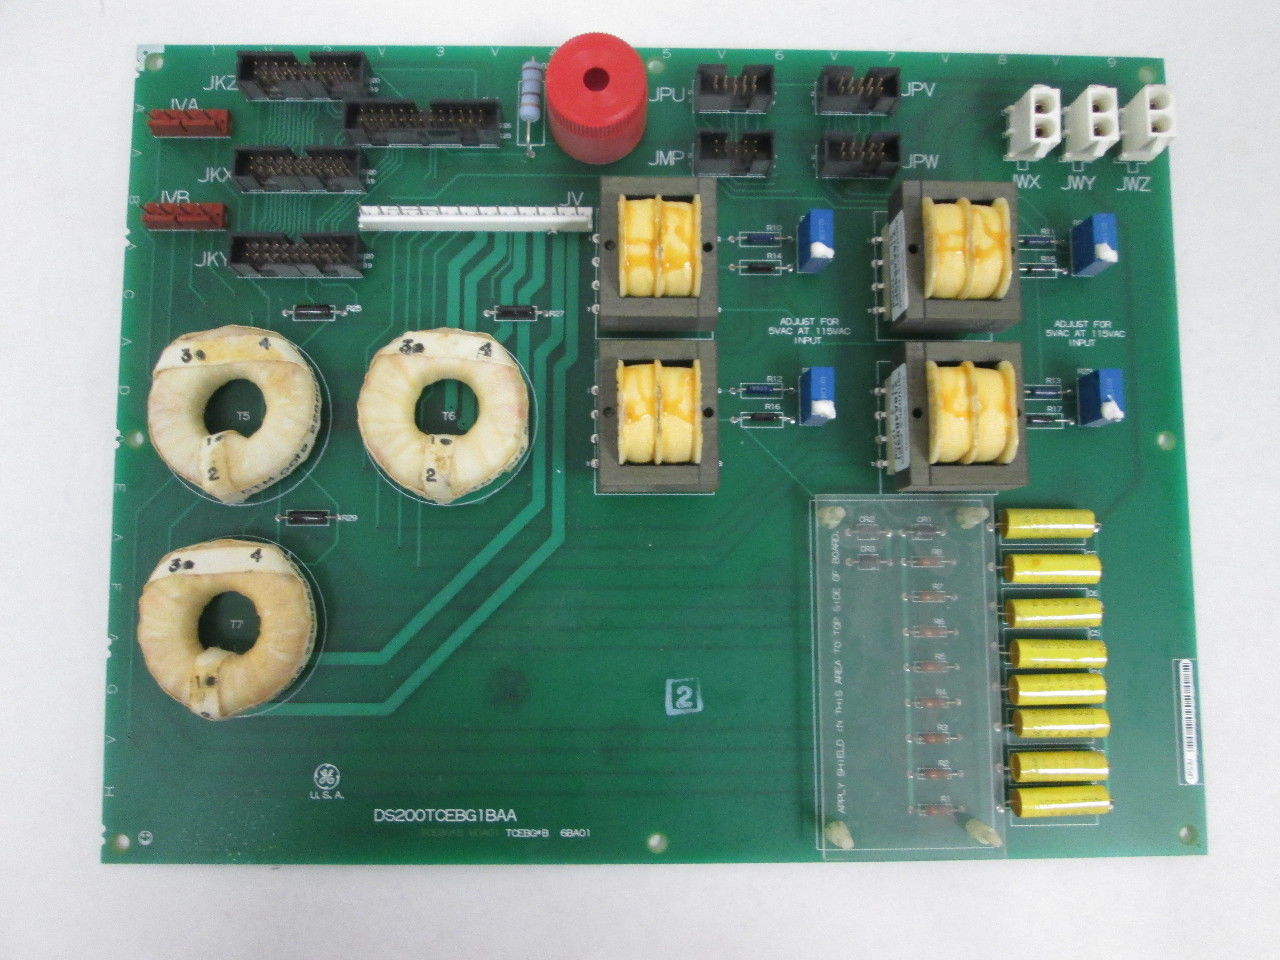 General Electric DS200TCEBG1BAA COMMON CİRCUIT EOS BOARD 